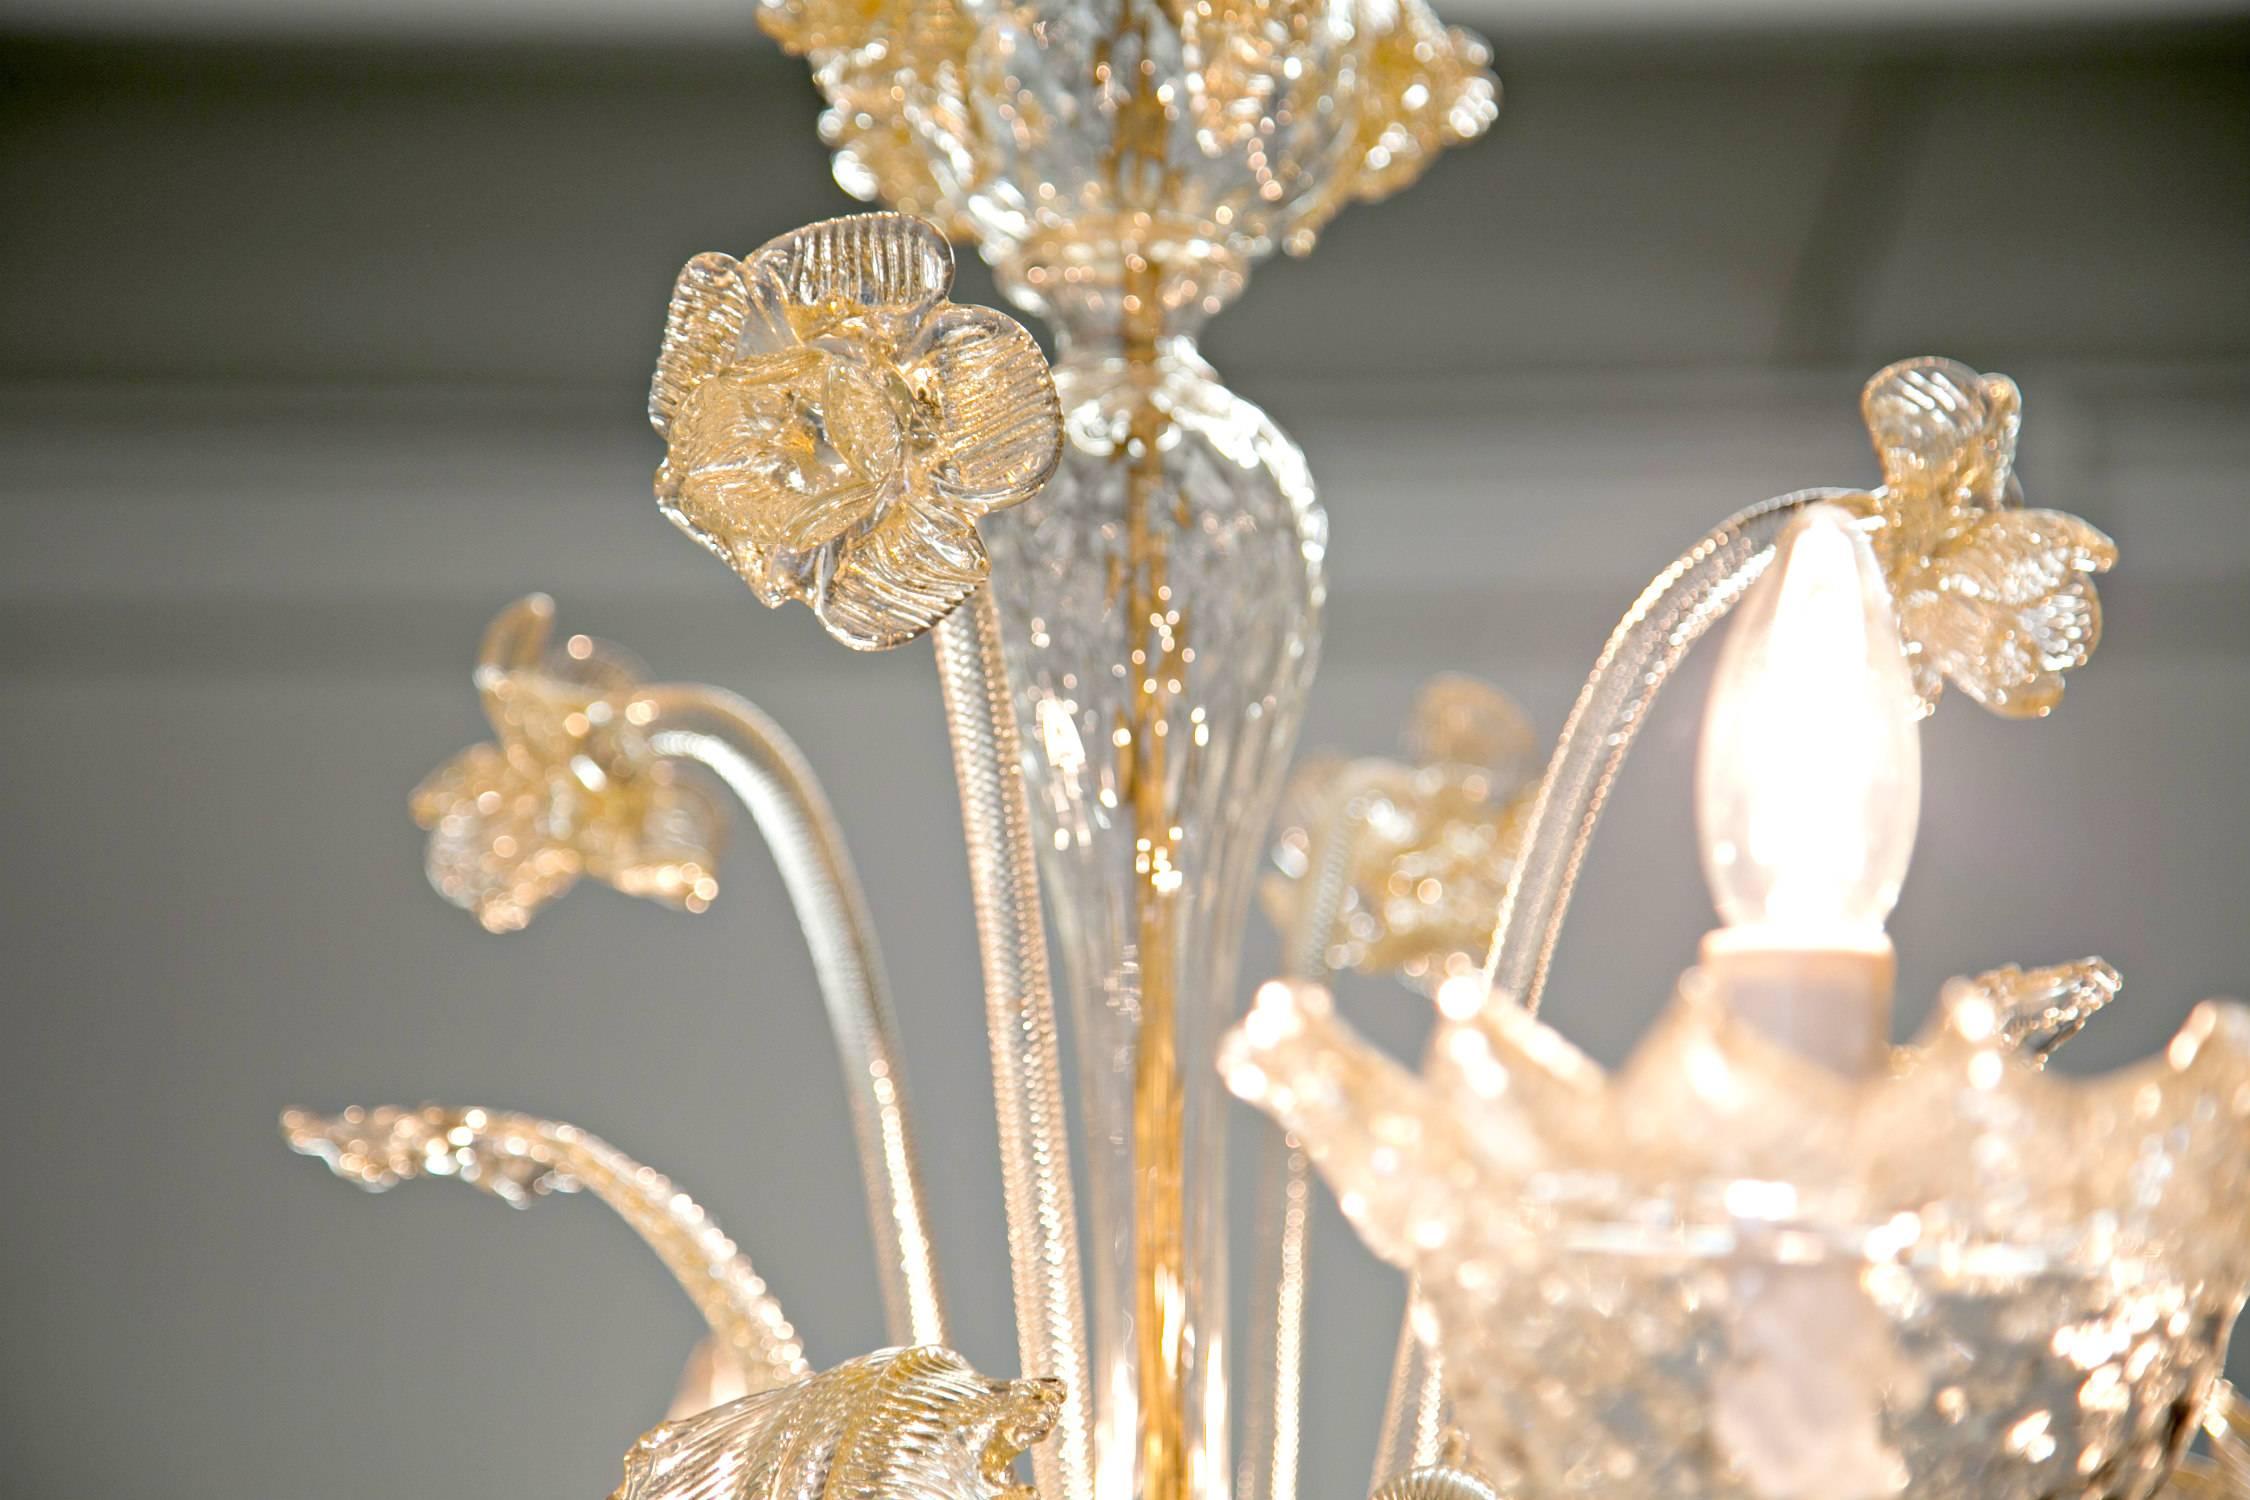 Vintage gold dust venetian glass daffodil chandelier, complete with all original handblown leaf and daffodil decoration. This circa 1950s Murano glass chandelier has four curved glass arms with candle style lights. Glass color is called gold dust